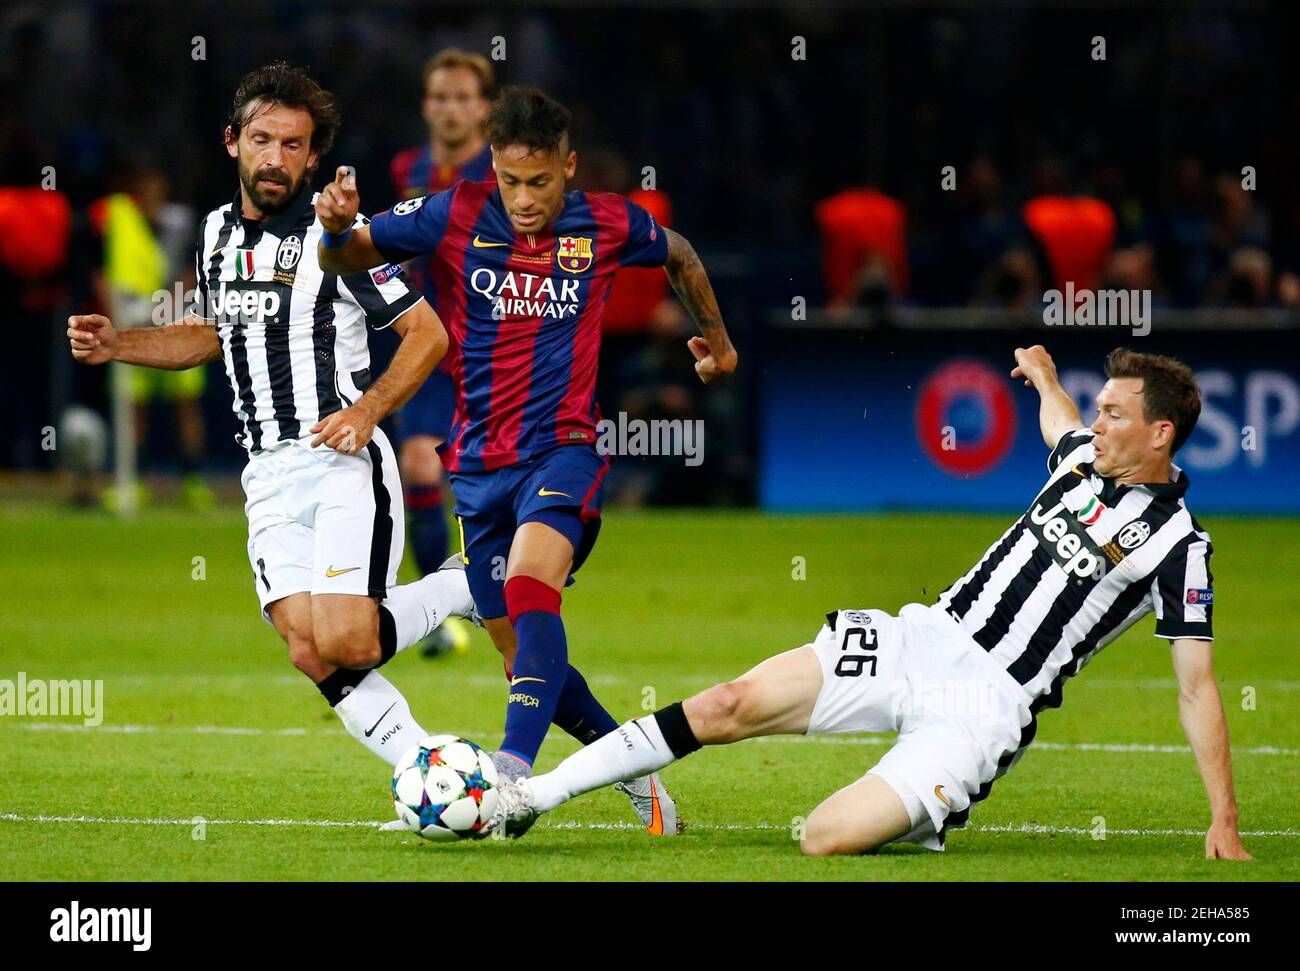 Football - FC Barcelona v Juventus - UEFA Champions League Final - Olympiastadion, Berlin, Germany - 6/6/15  Juventus' Andrea Pirlo and Stephan Lichtsteiner  in action with Barcelona's Neymar  Reuters / Michael Dalder Stock Photo